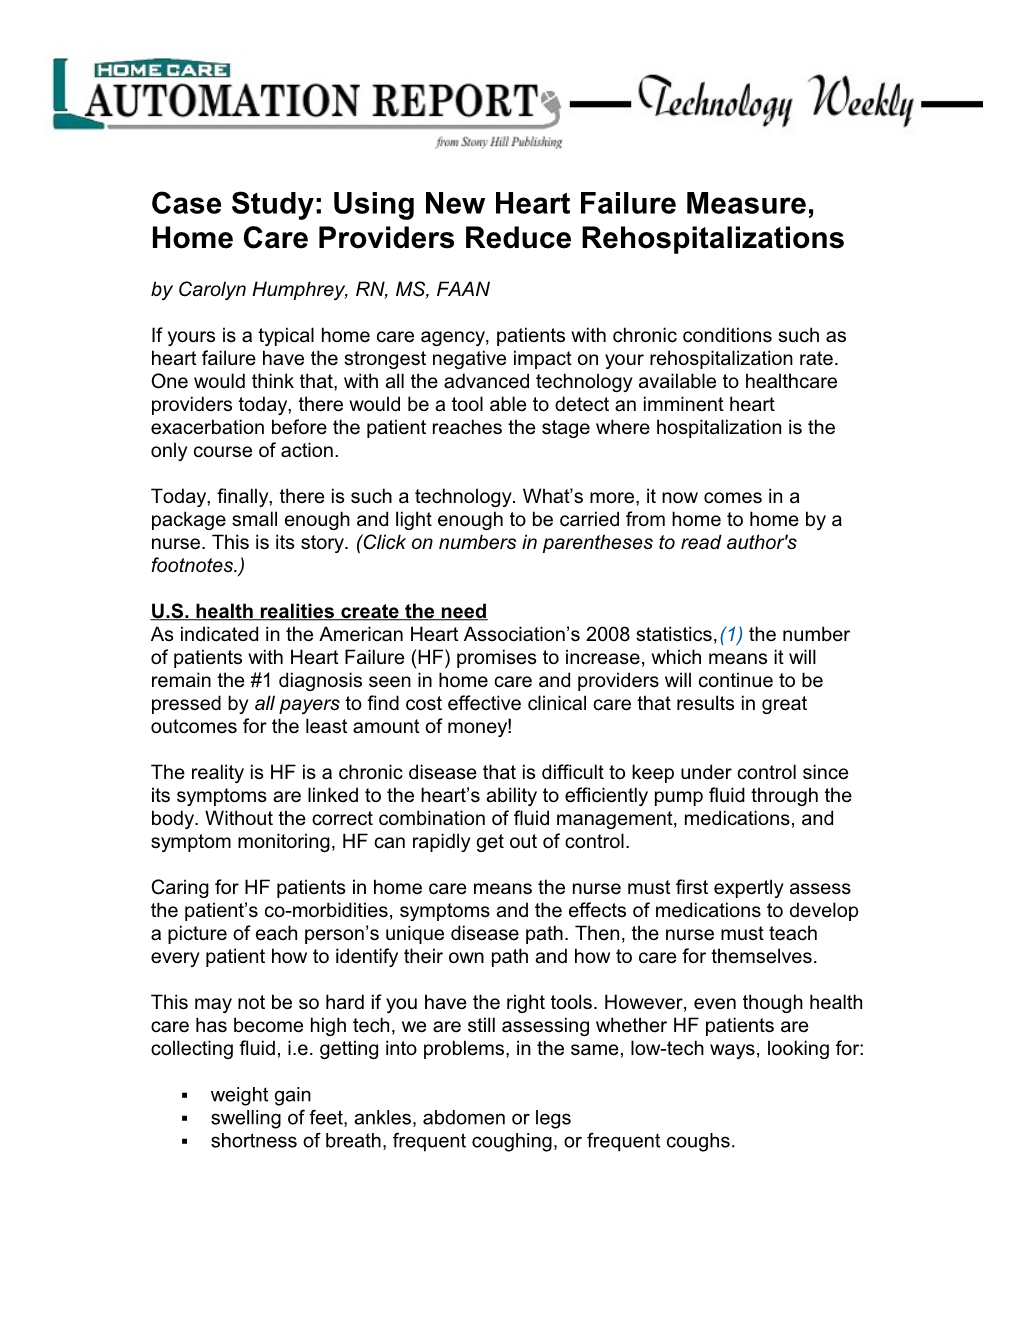 Case Study: Using New Heart Failure Measure, Home Care Providers Reduce Rehospitalizations